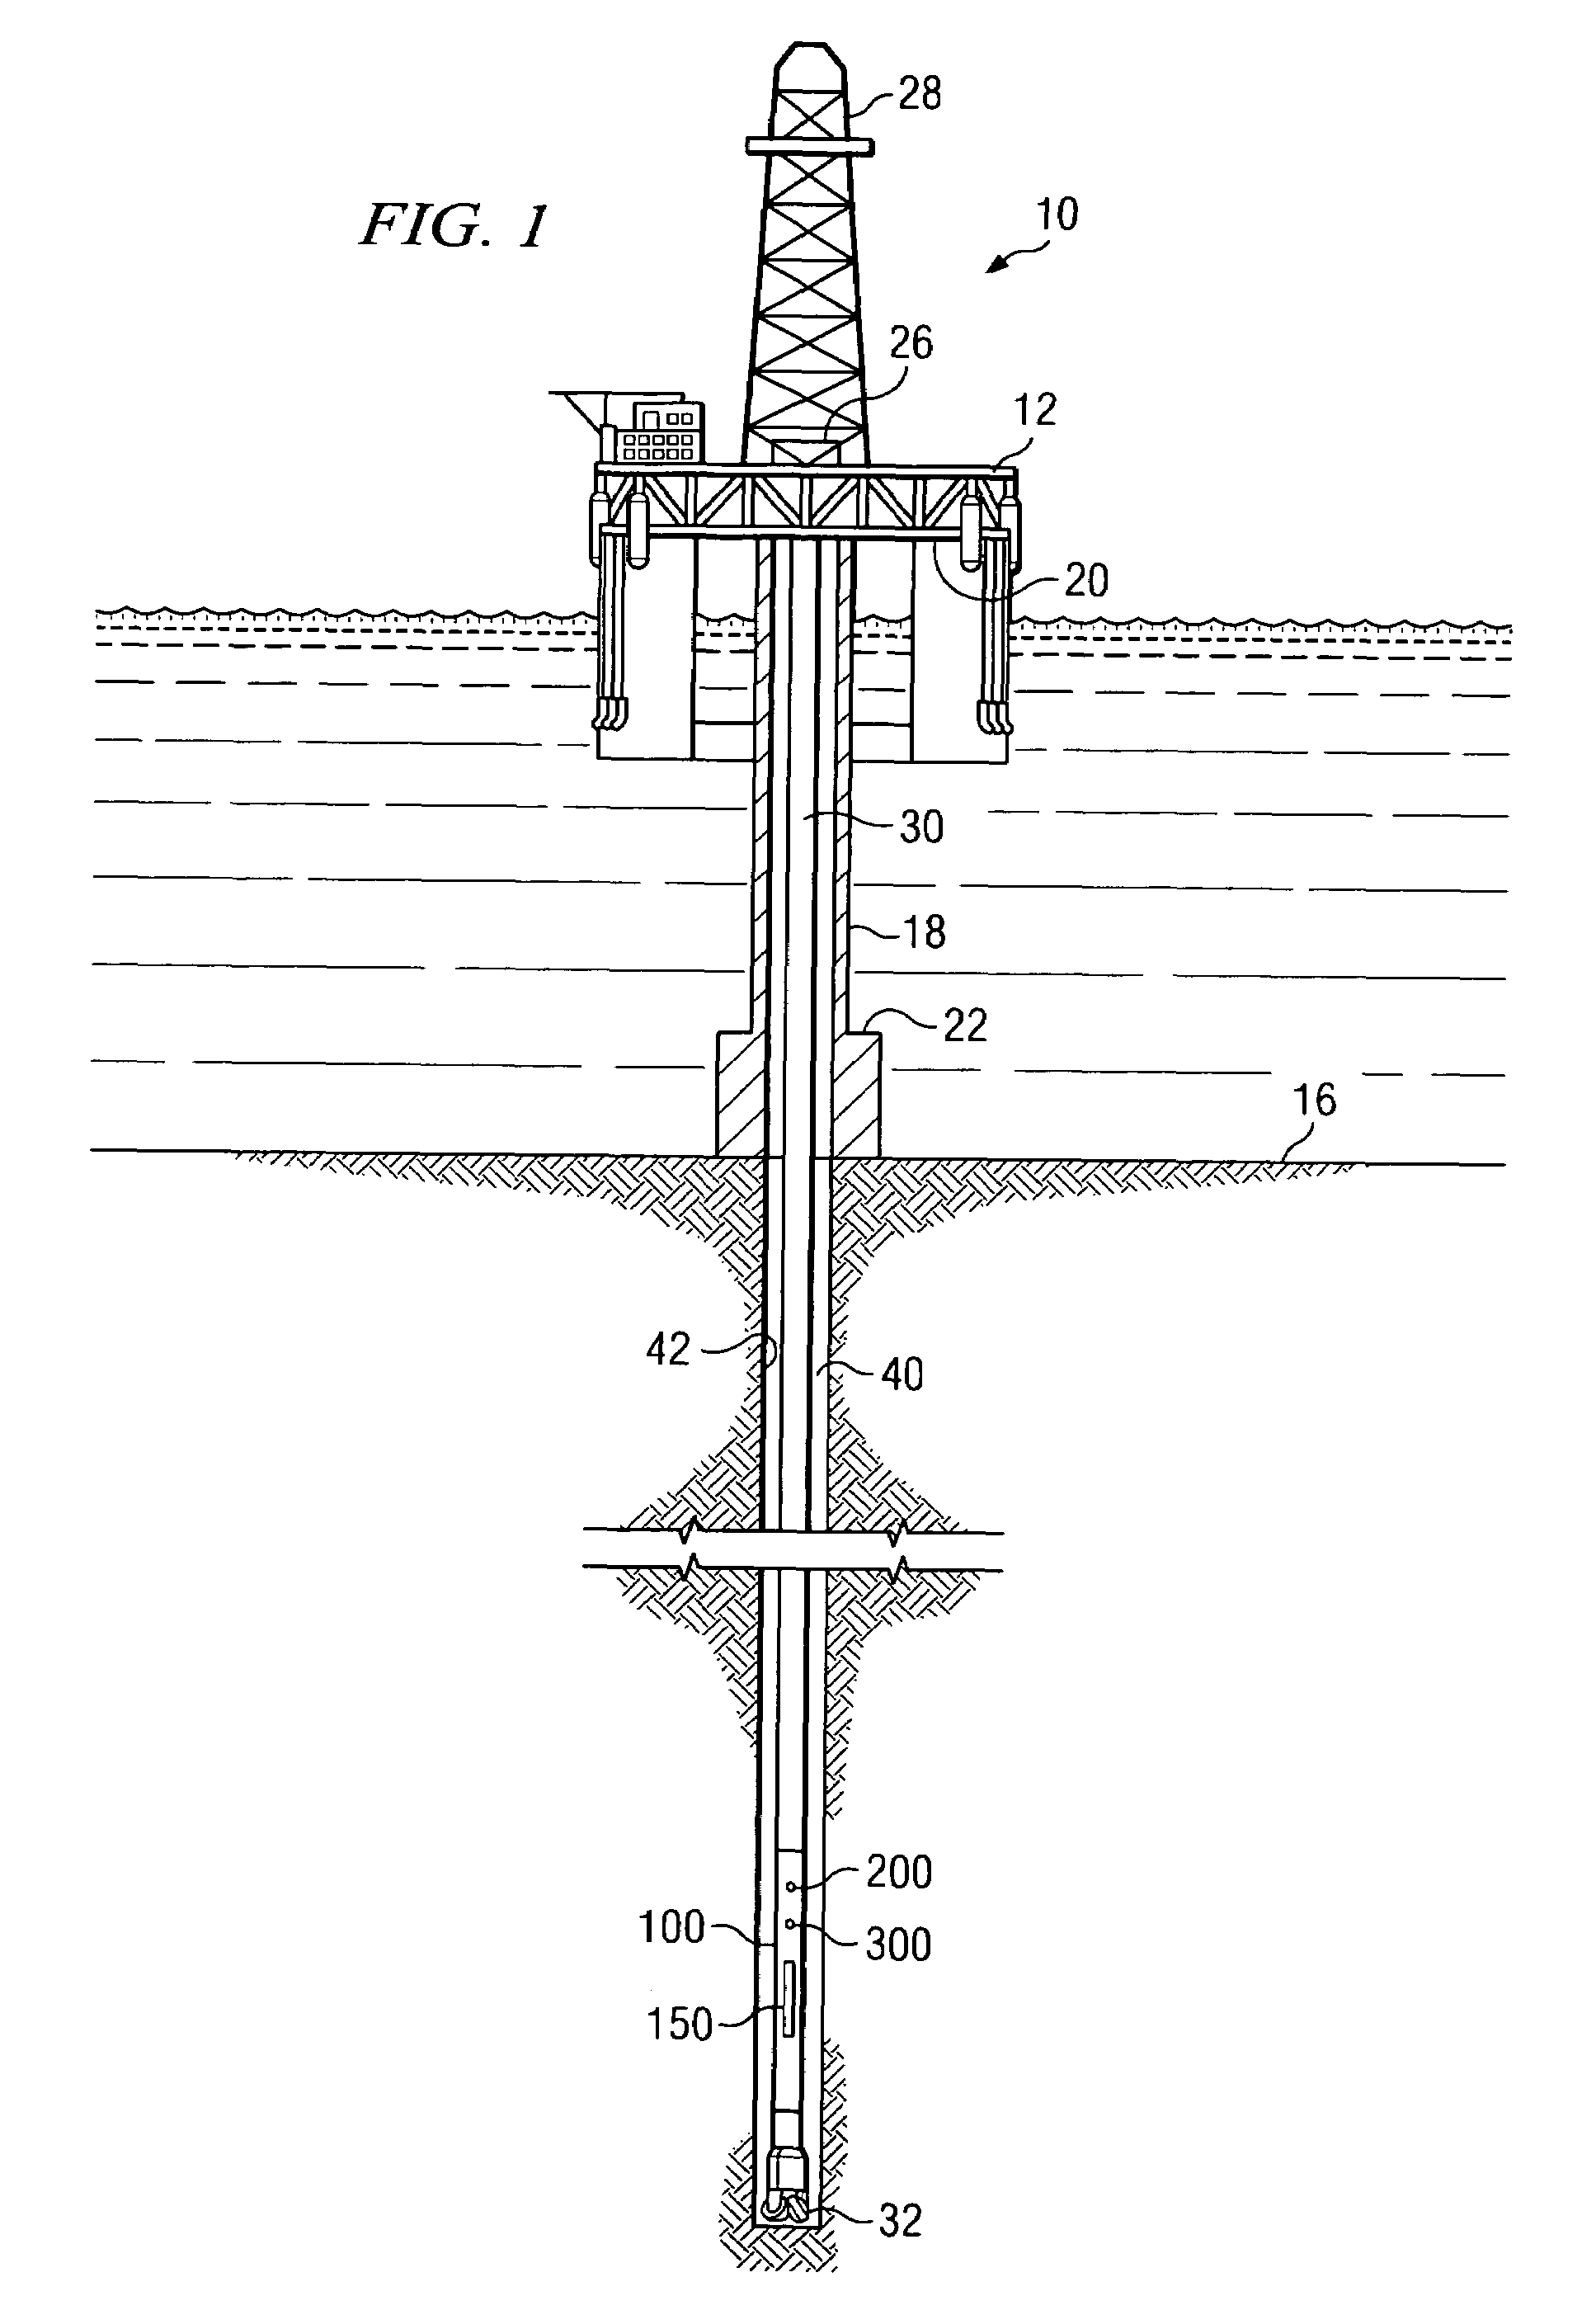 Apparatus and method for downhole dynamics measurements